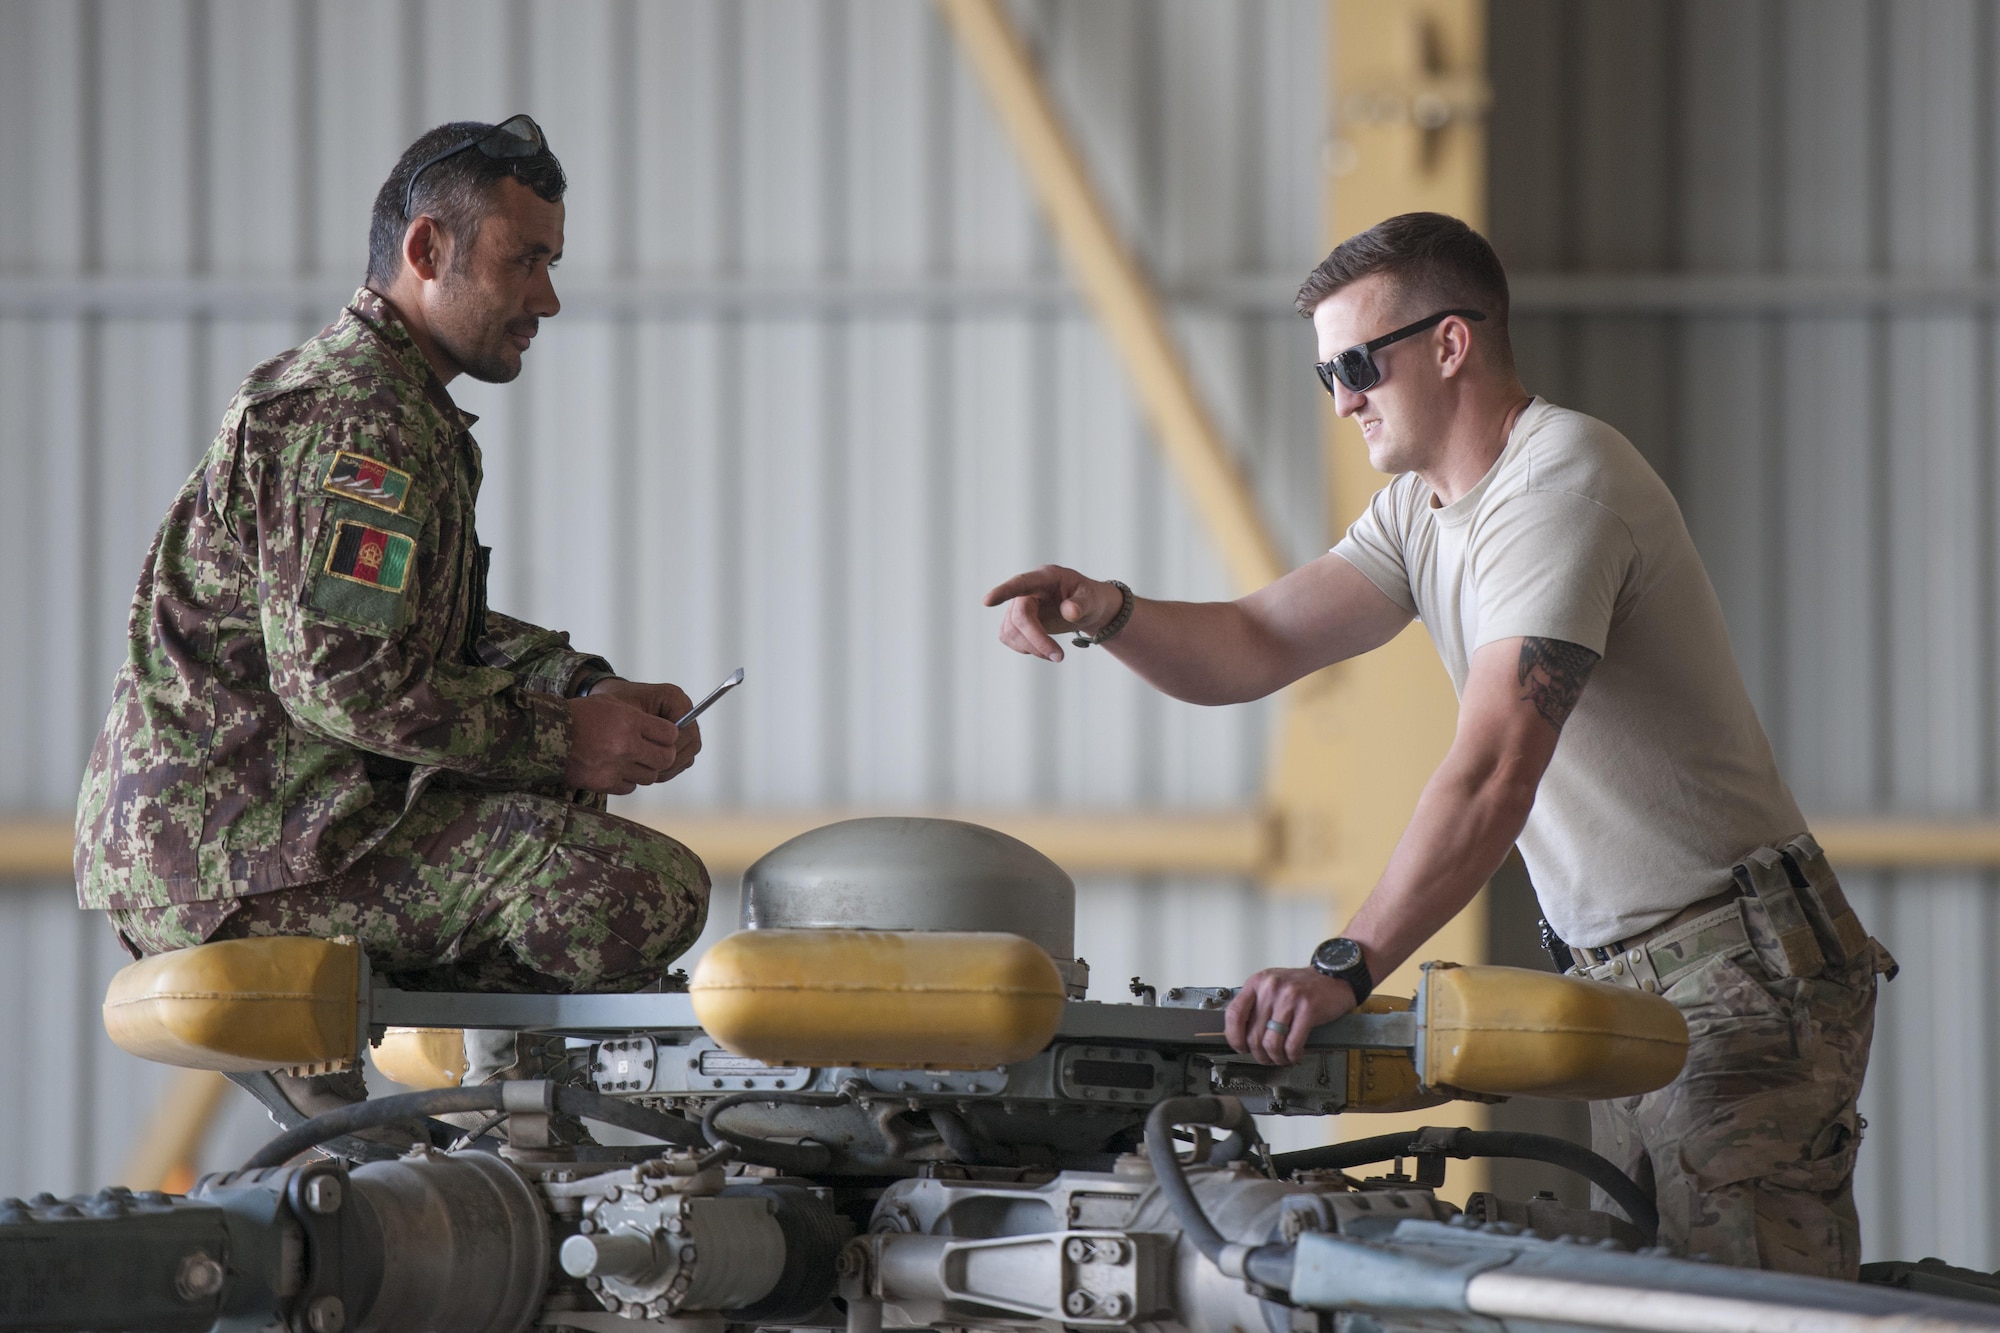 Tech. Sgt. Richard Embrey, Train Advise Assist Command - Air Mi-17 Intermediate Maintenance Squadron advisor, advises an Afghan Air Force member during a 100-hour inspection on an Mi-17 at Kandahar Airfield, March 2, 2016. As a functional command, TAAC-Air assists our Afghan partners to develop a professional, capable and sustainable force. (U.S. Air Force photo/Tech. Sgt. Robert Cloys)